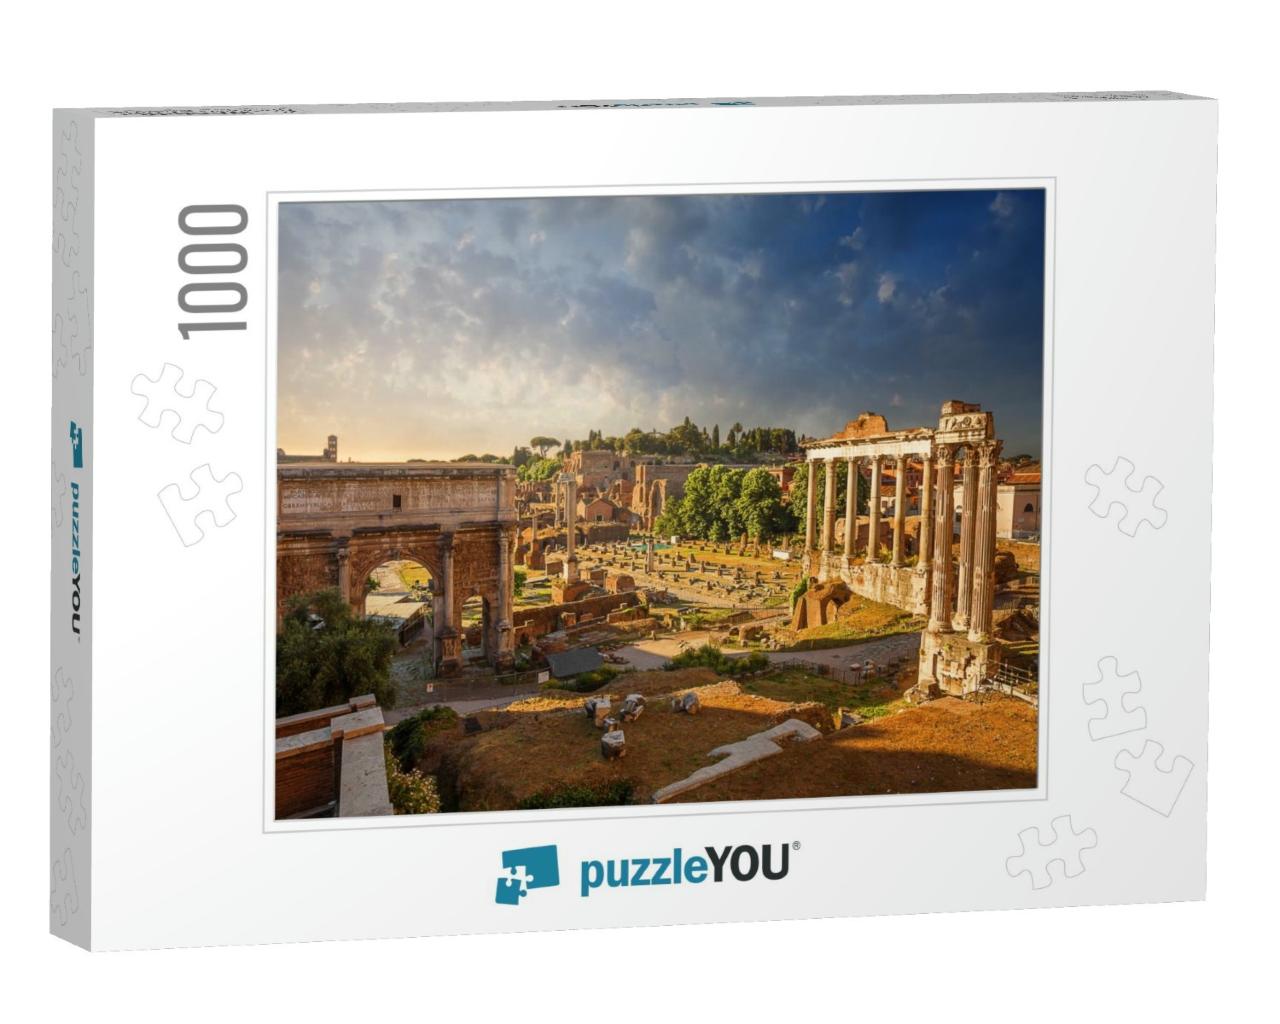 Foro Romano. Rome. Italy... Jigsaw Puzzle with 1000 pieces